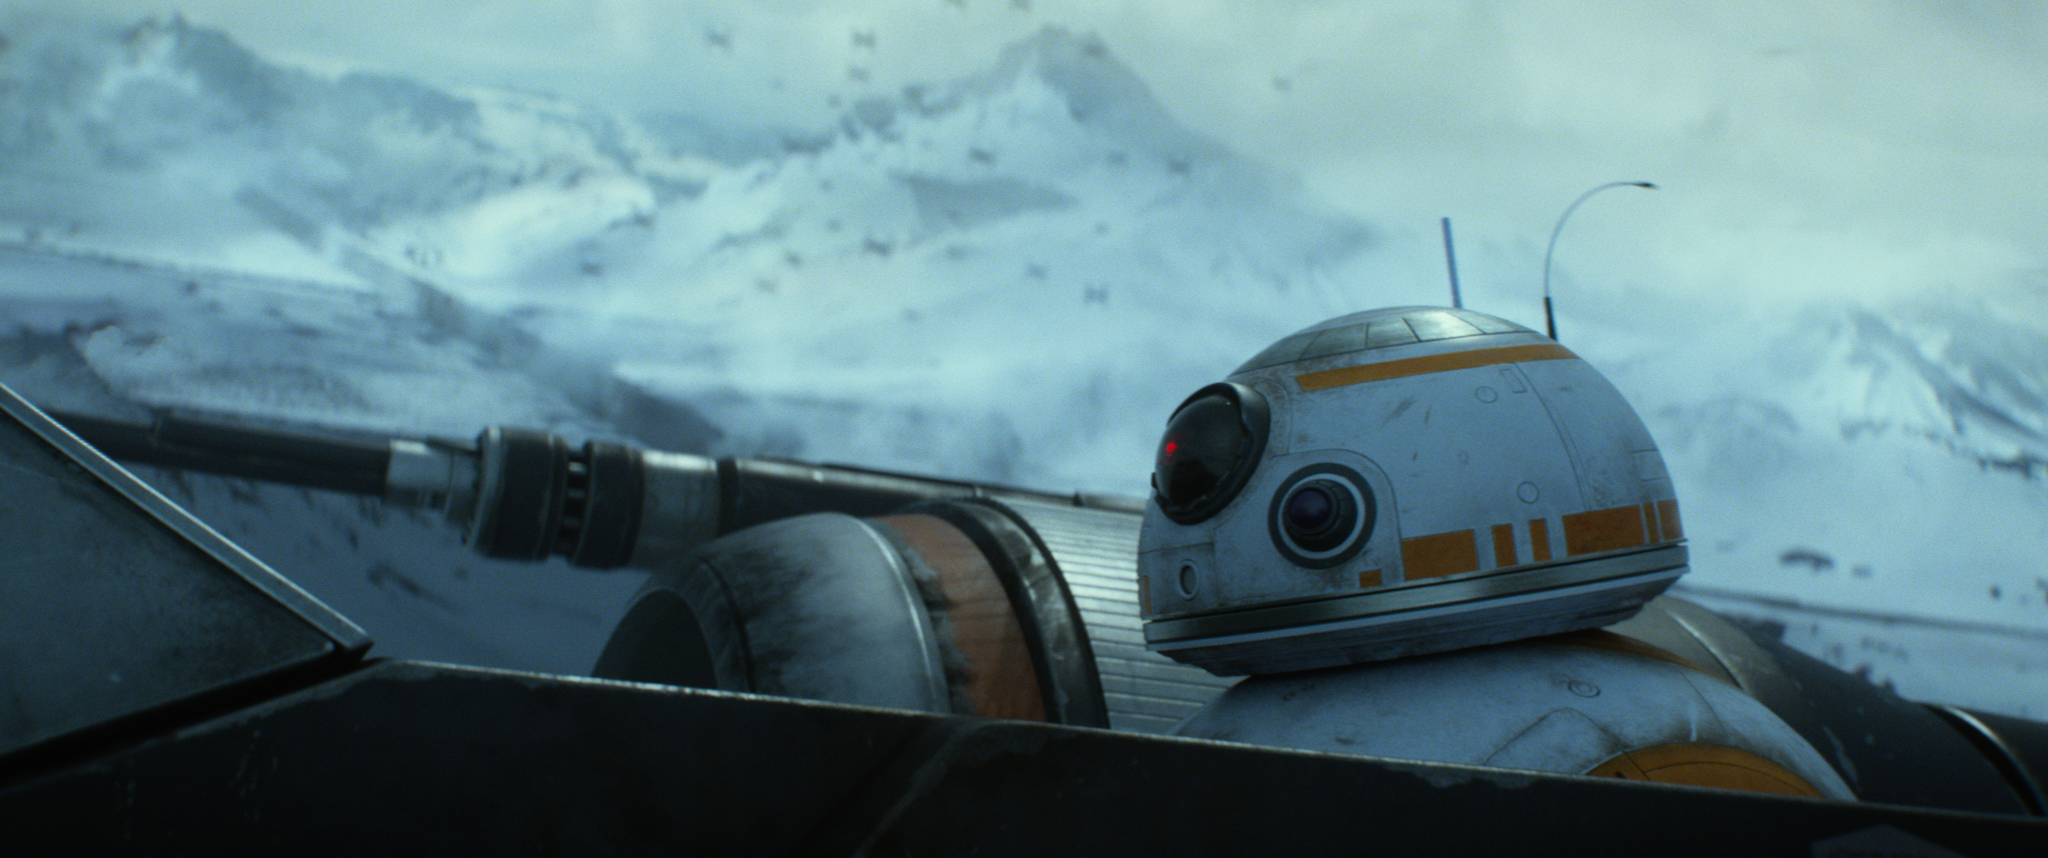 Star Wars 7 Images Are Perfect for Desktop Wallpaper | Collider